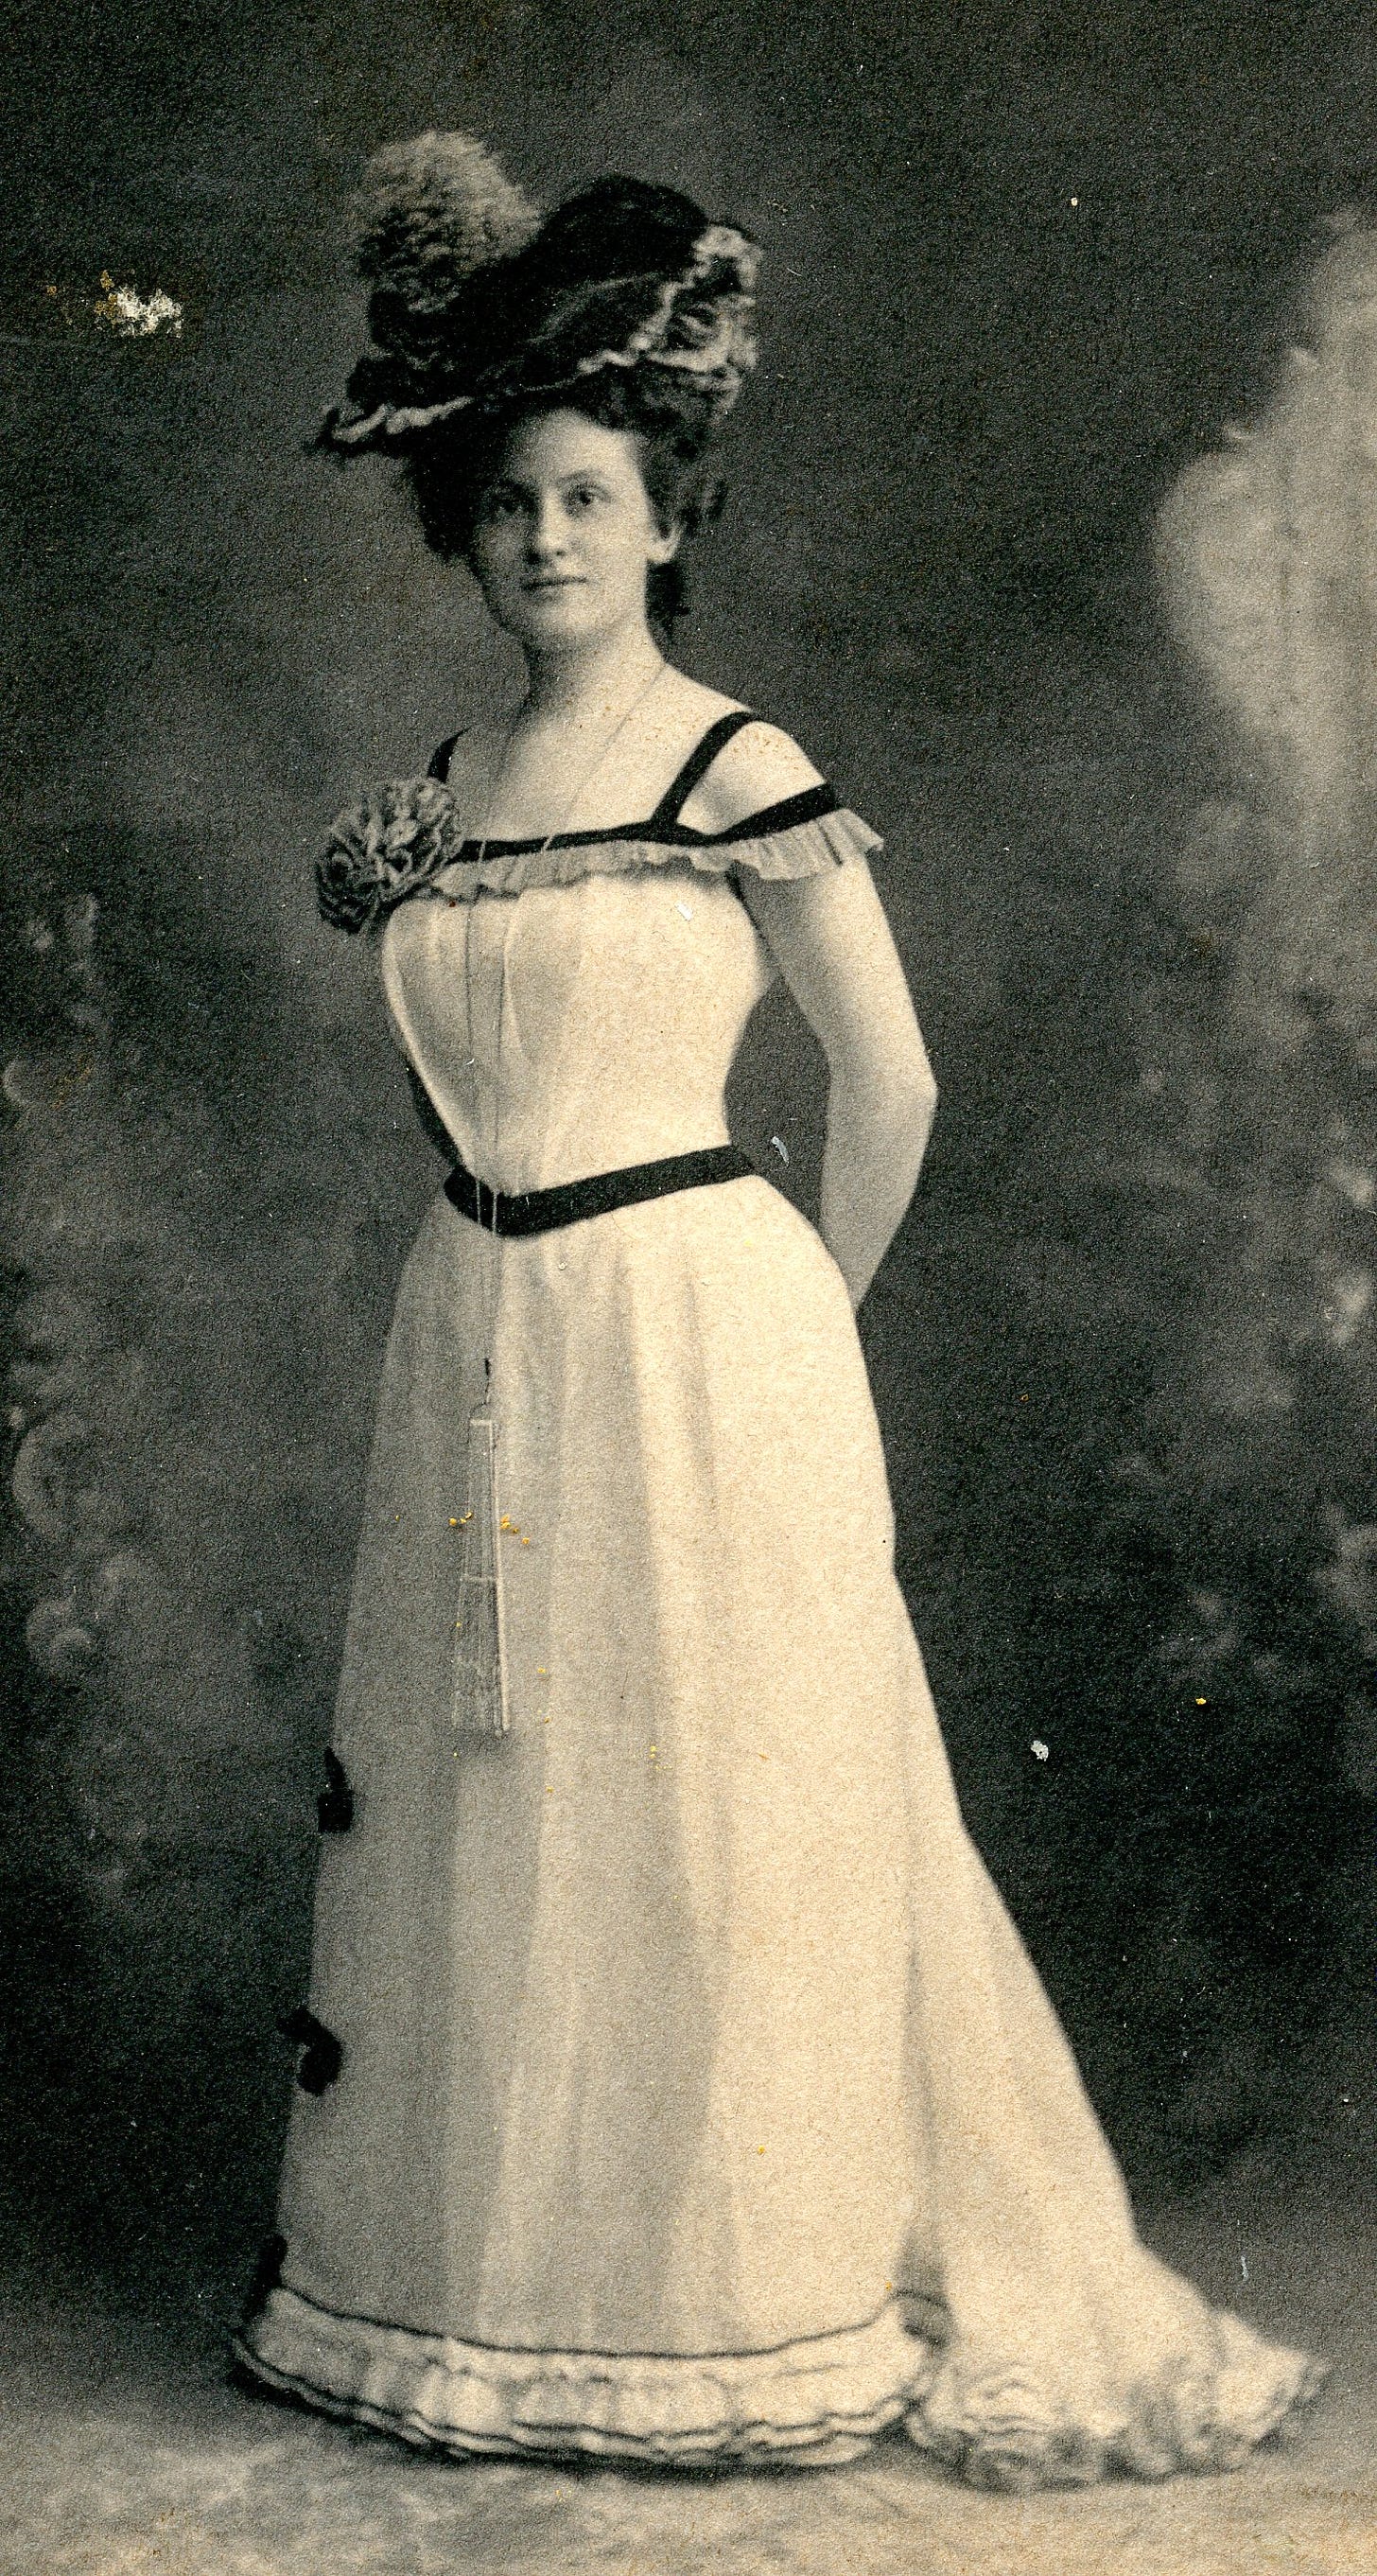 Woman with fancy hat and elegant gown